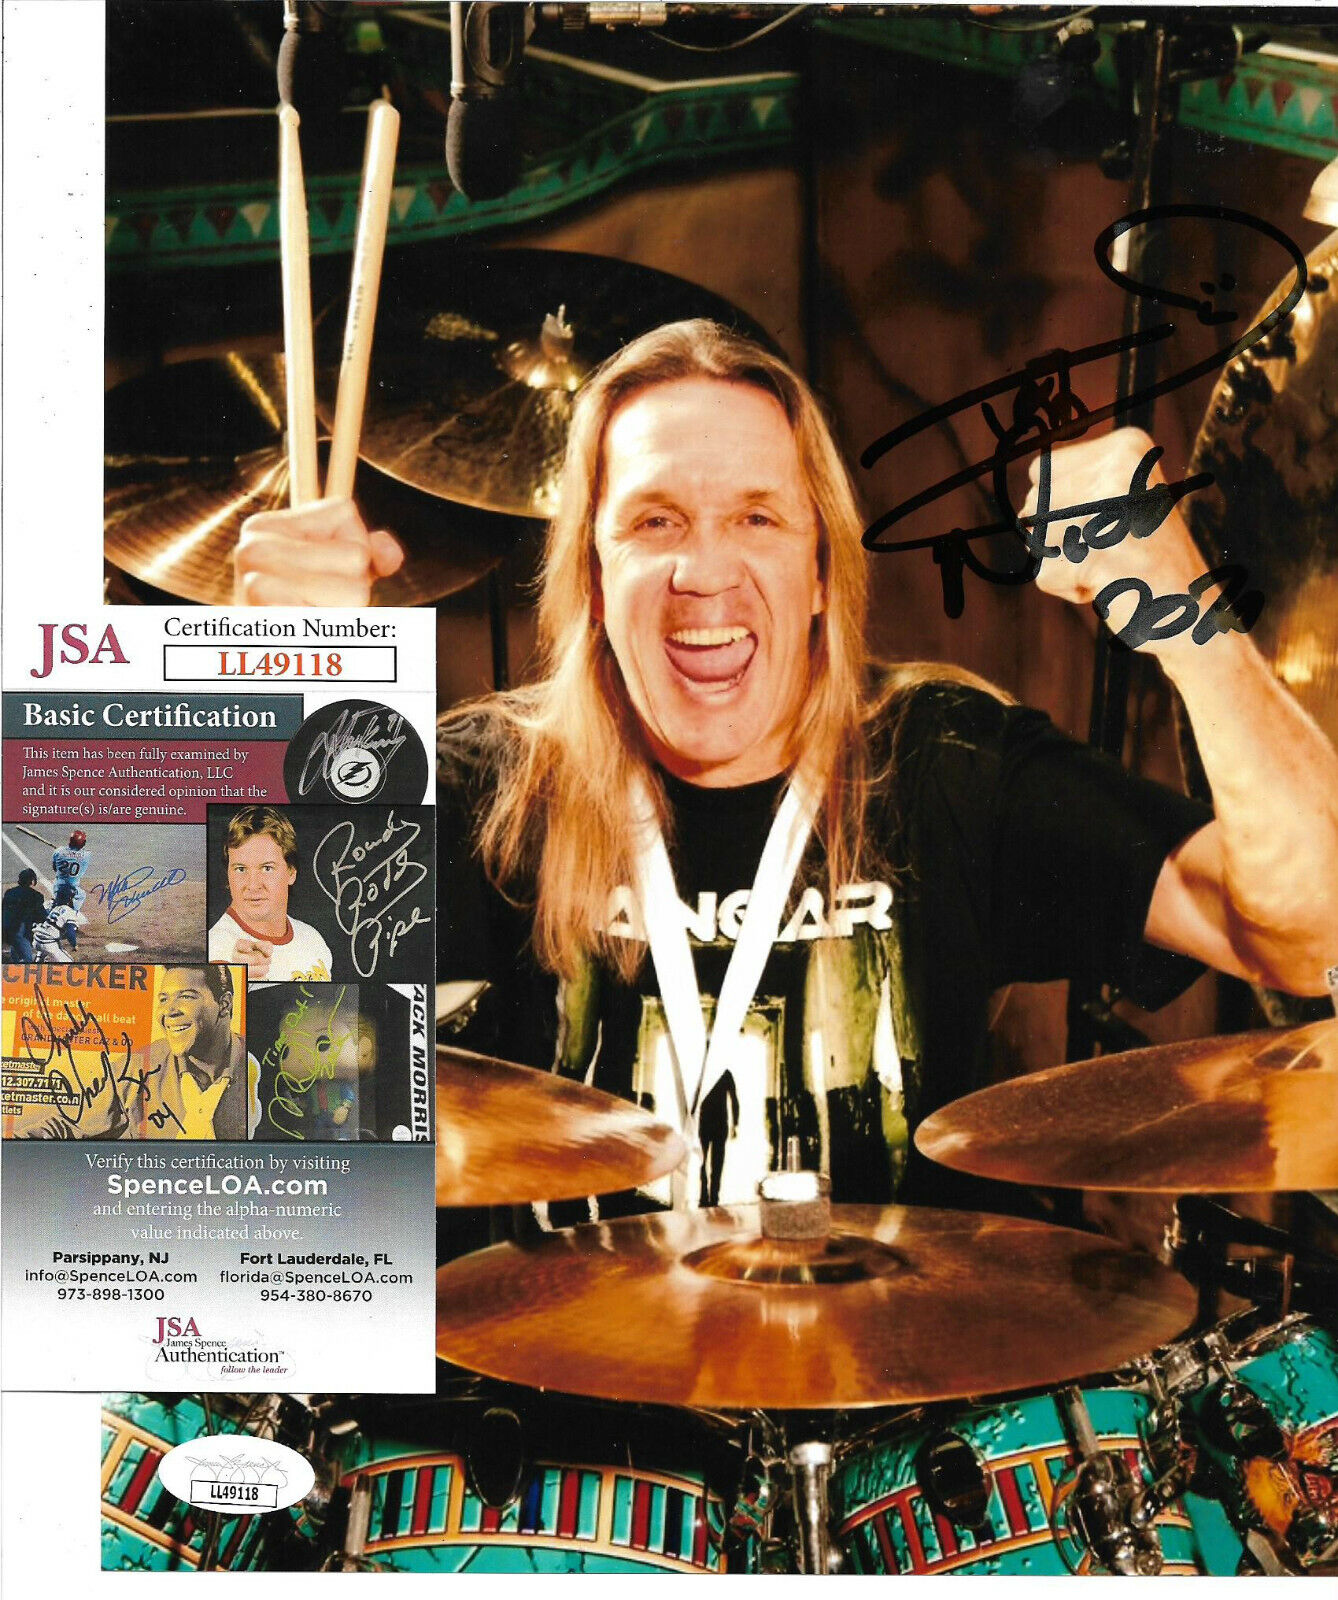 Nicko McBrain Signed 8x10 Photo Poster painting Autographed, Drummer of Iron Maiden, JSA COA